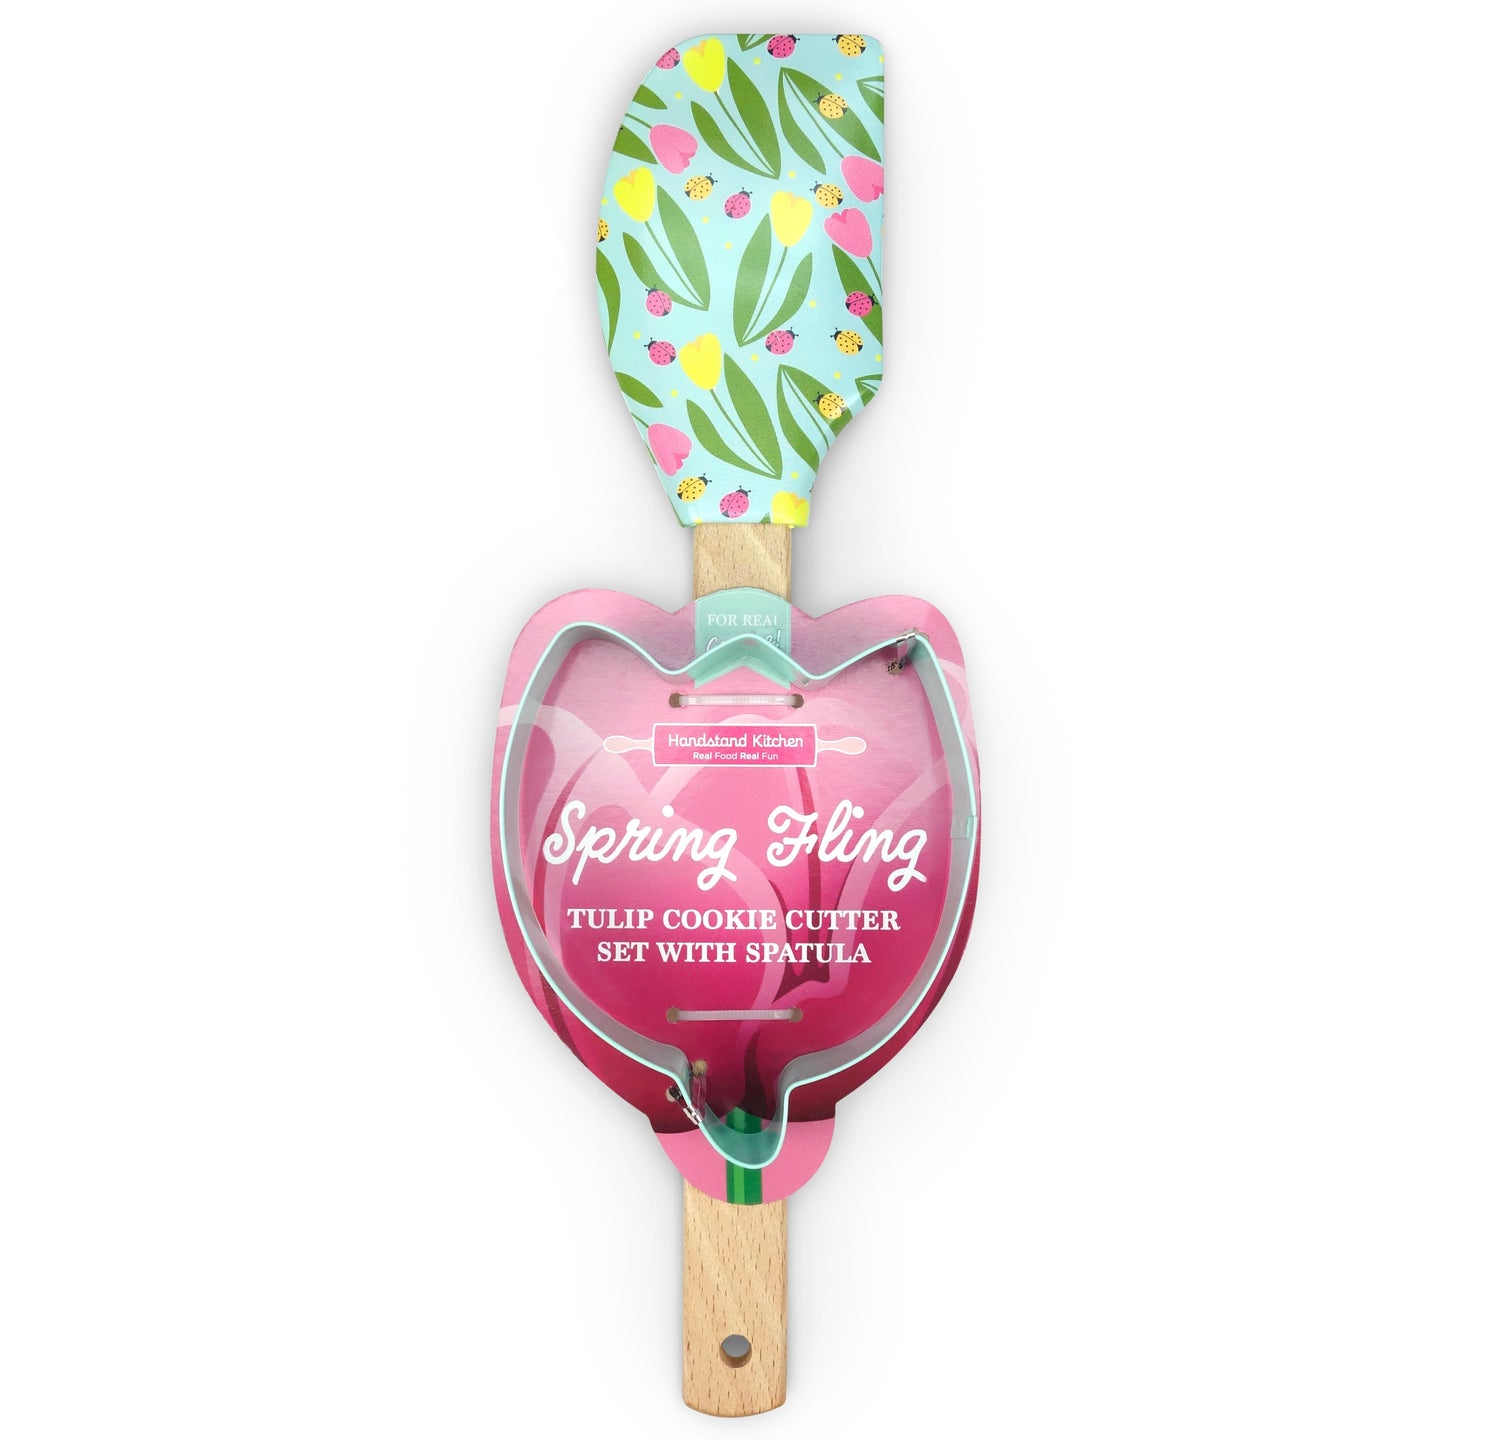 Spring Fling Tulip Cookie Cutter Set with Spatula